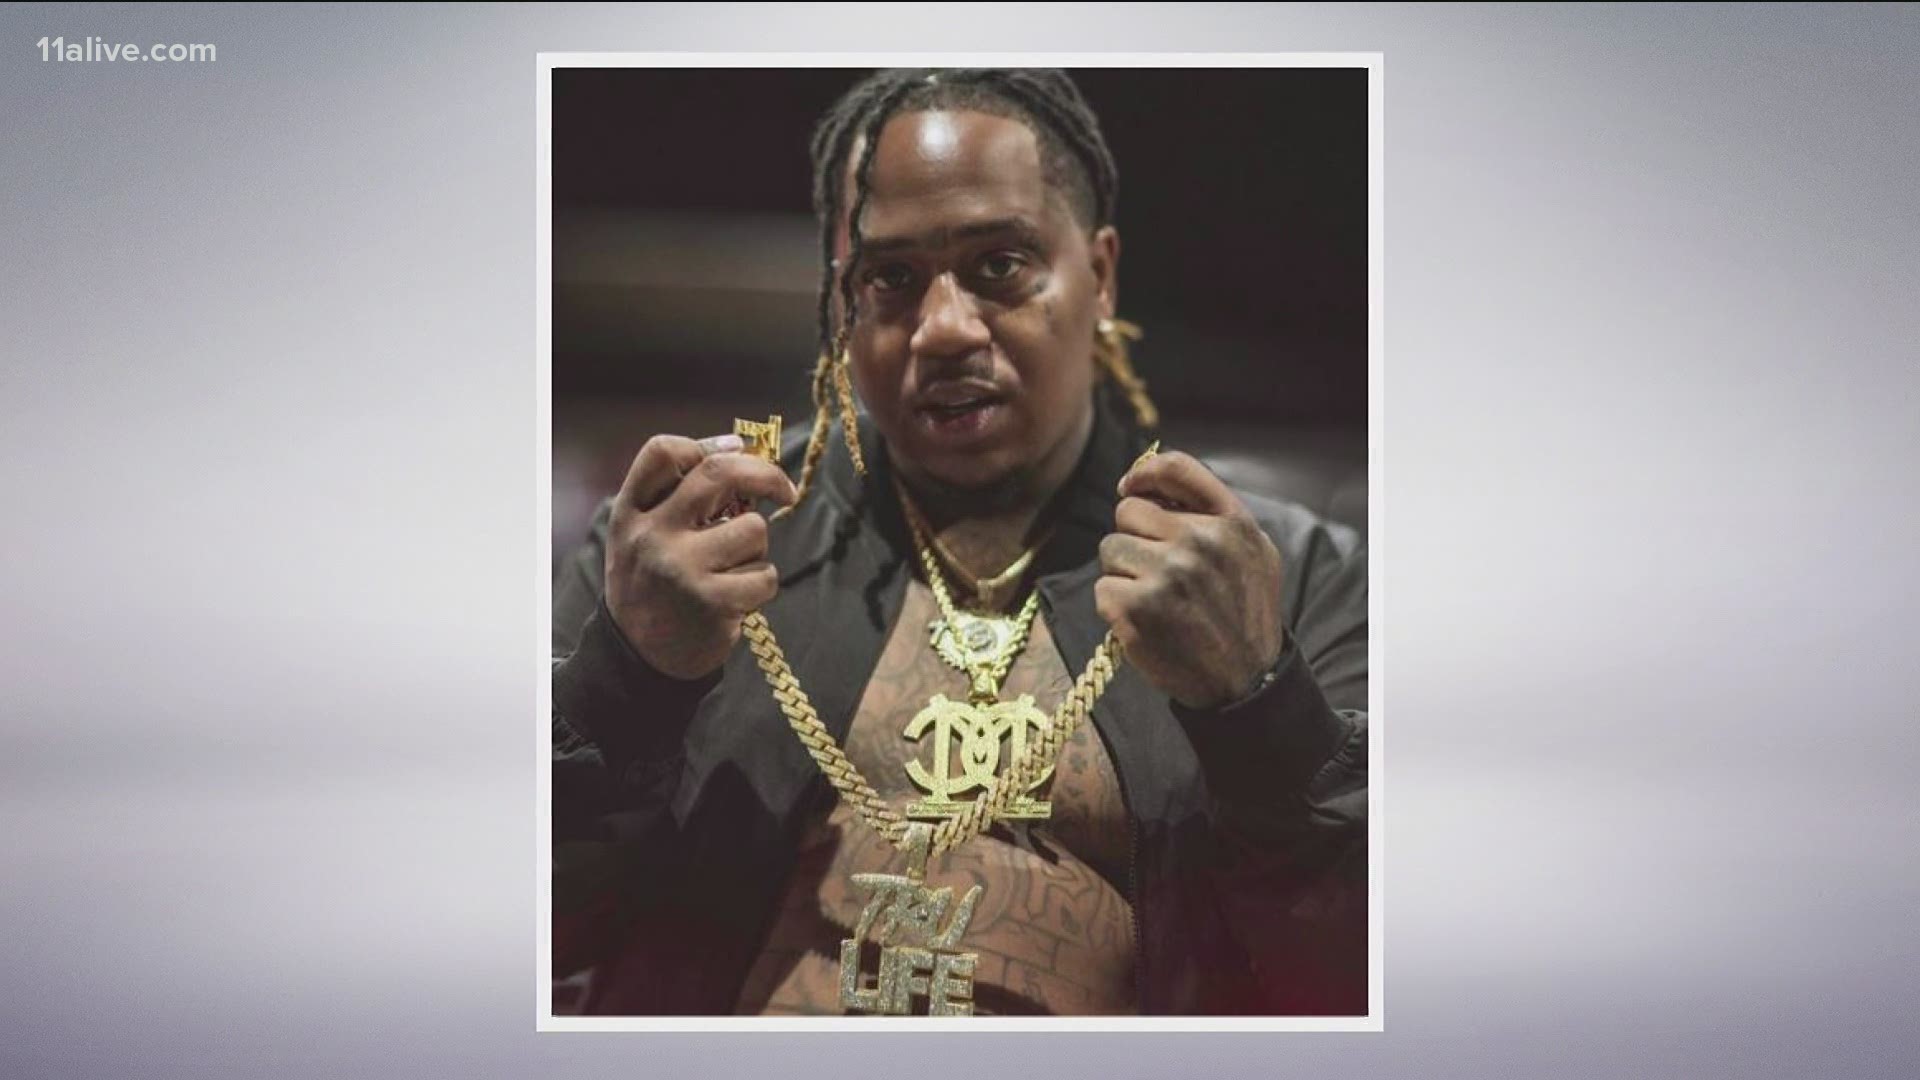 The Houston-area rapper was shot and killed in a metro Atlanta interstate shooting Friday morning, according to his management team.